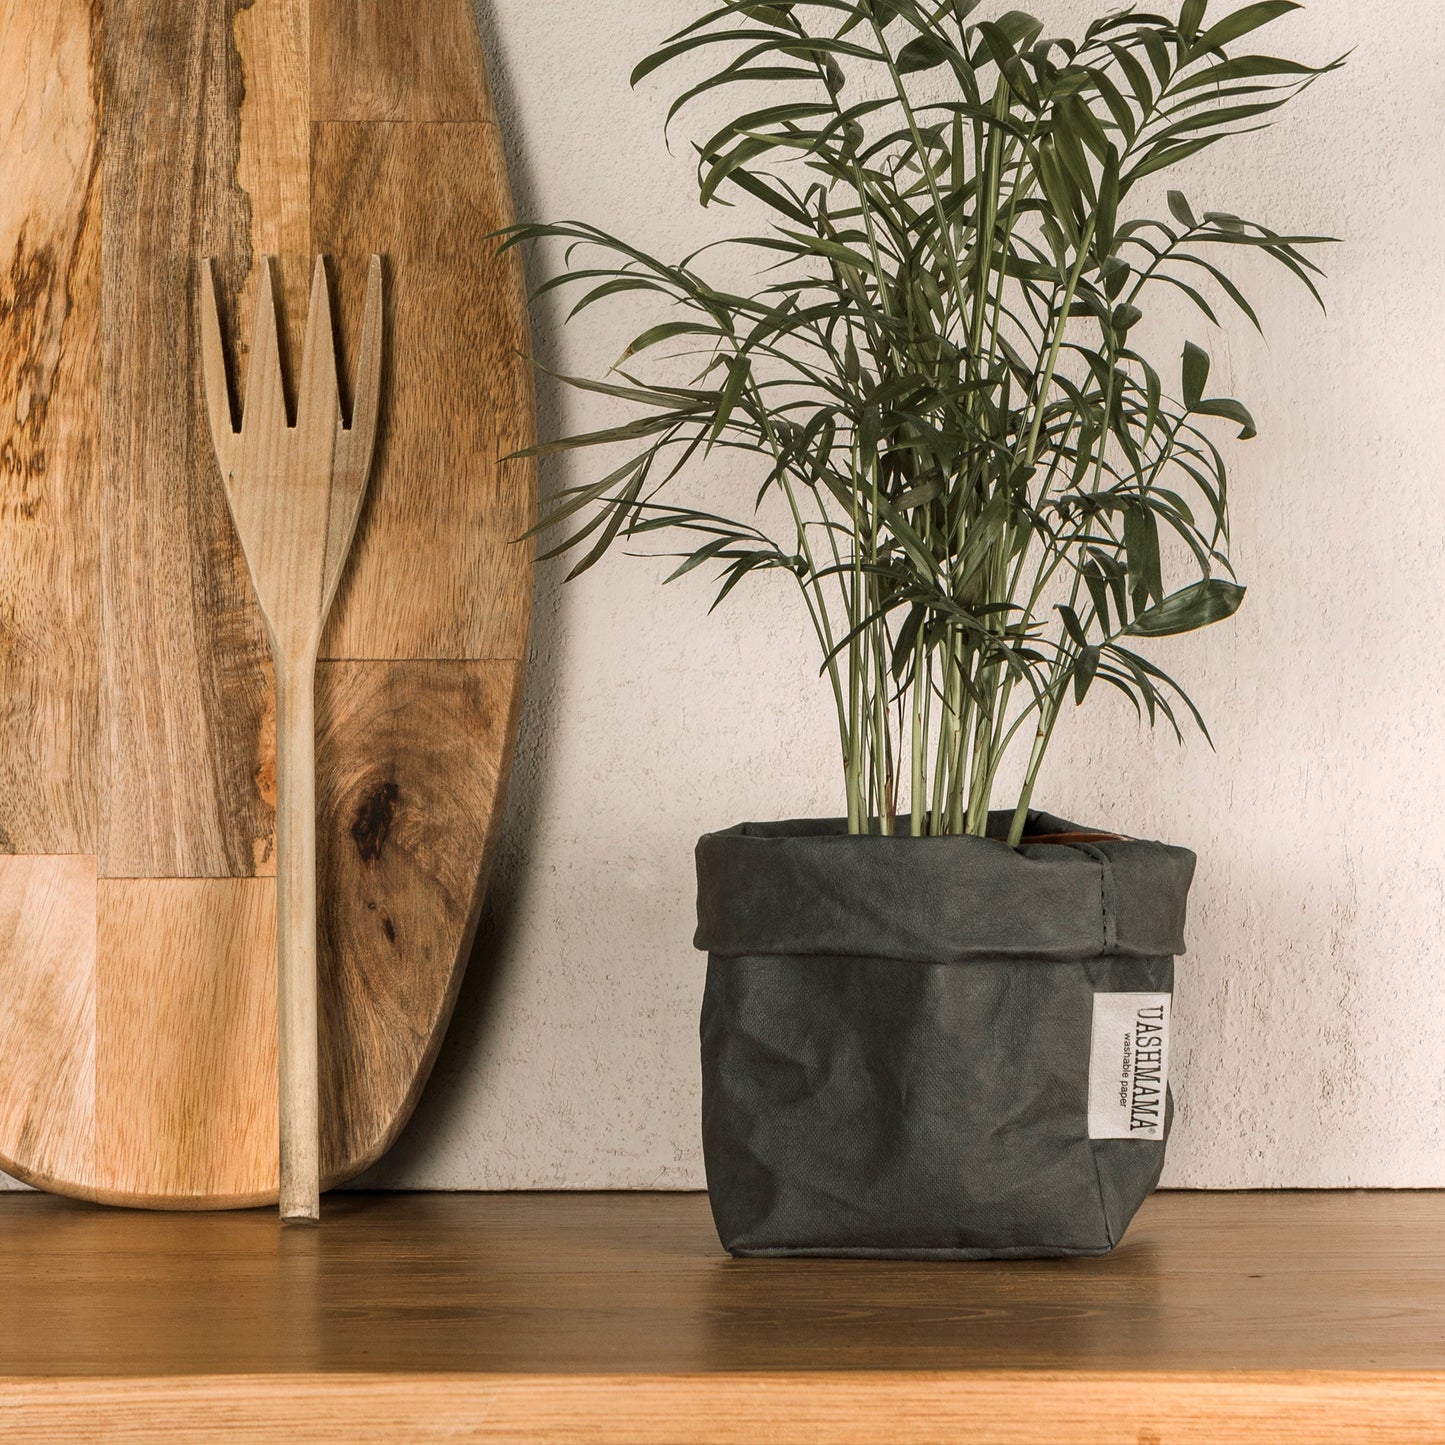 A small dark grey washable paper bag is shown containing a tall green leafy plant. On the left leaning against the wall are a wooden chopping boar and wooden fork.